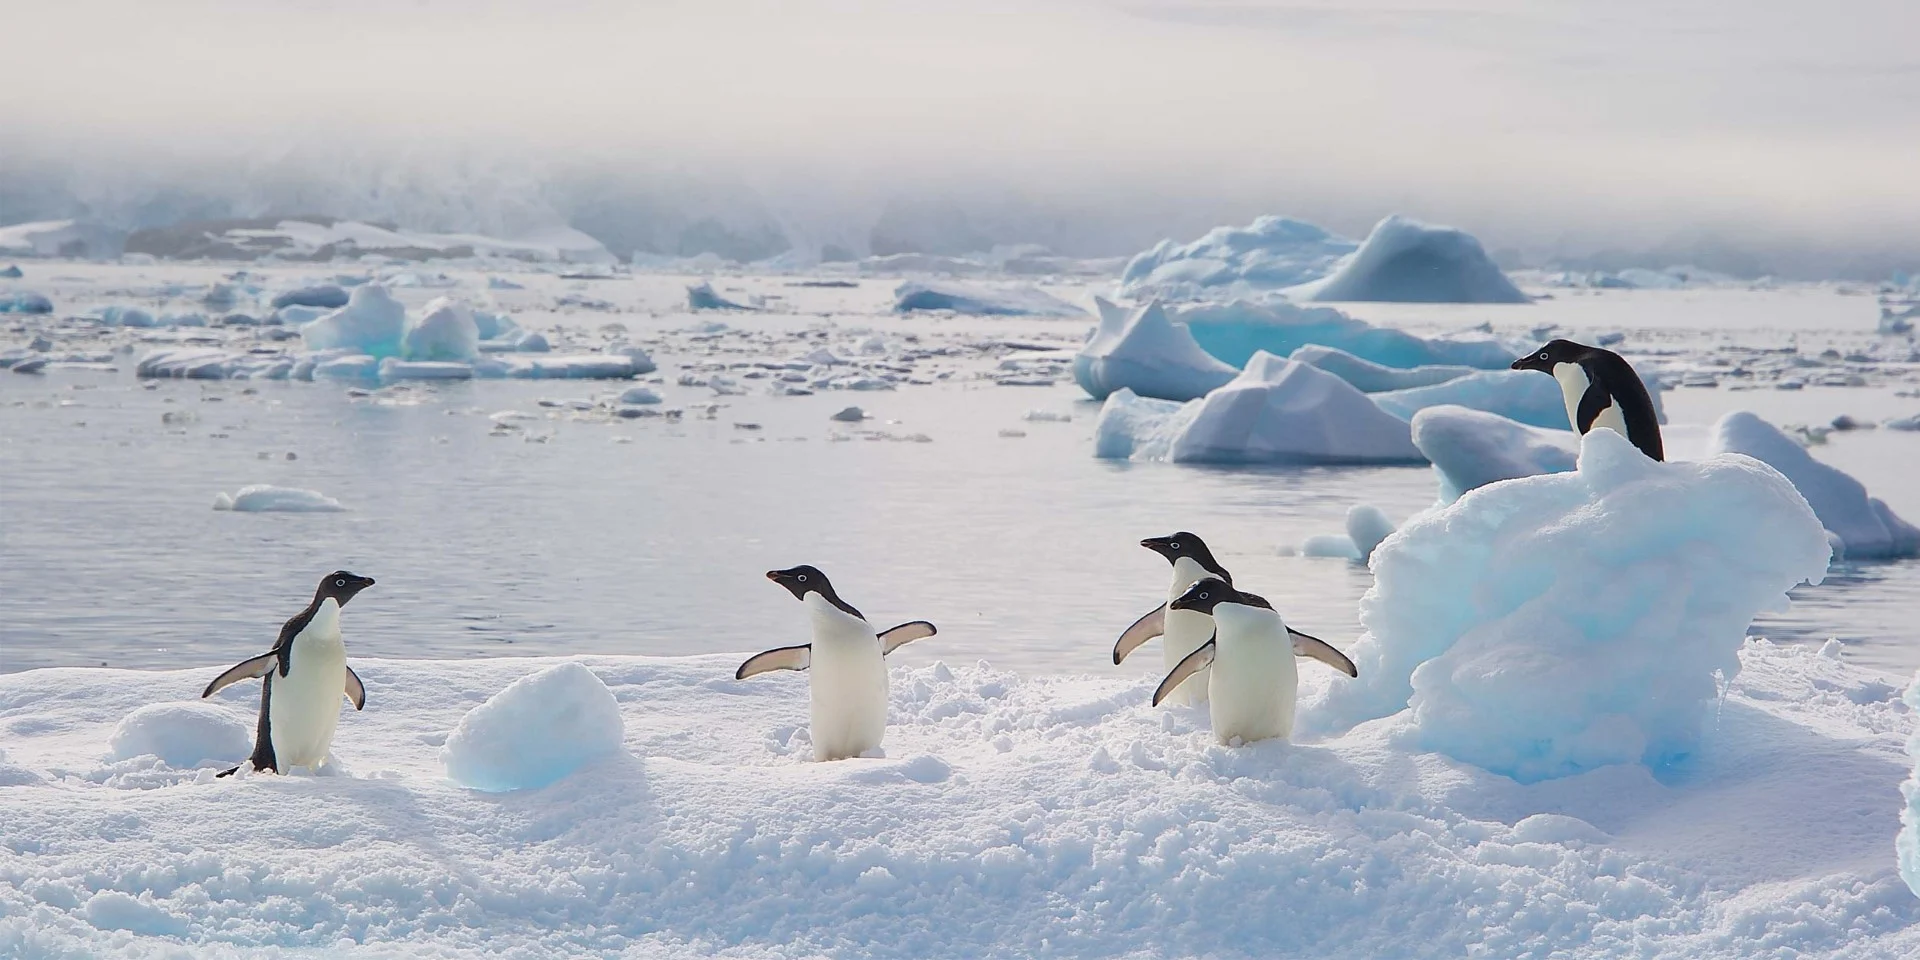 14 Fun Facts About the Penguins of Antarctica